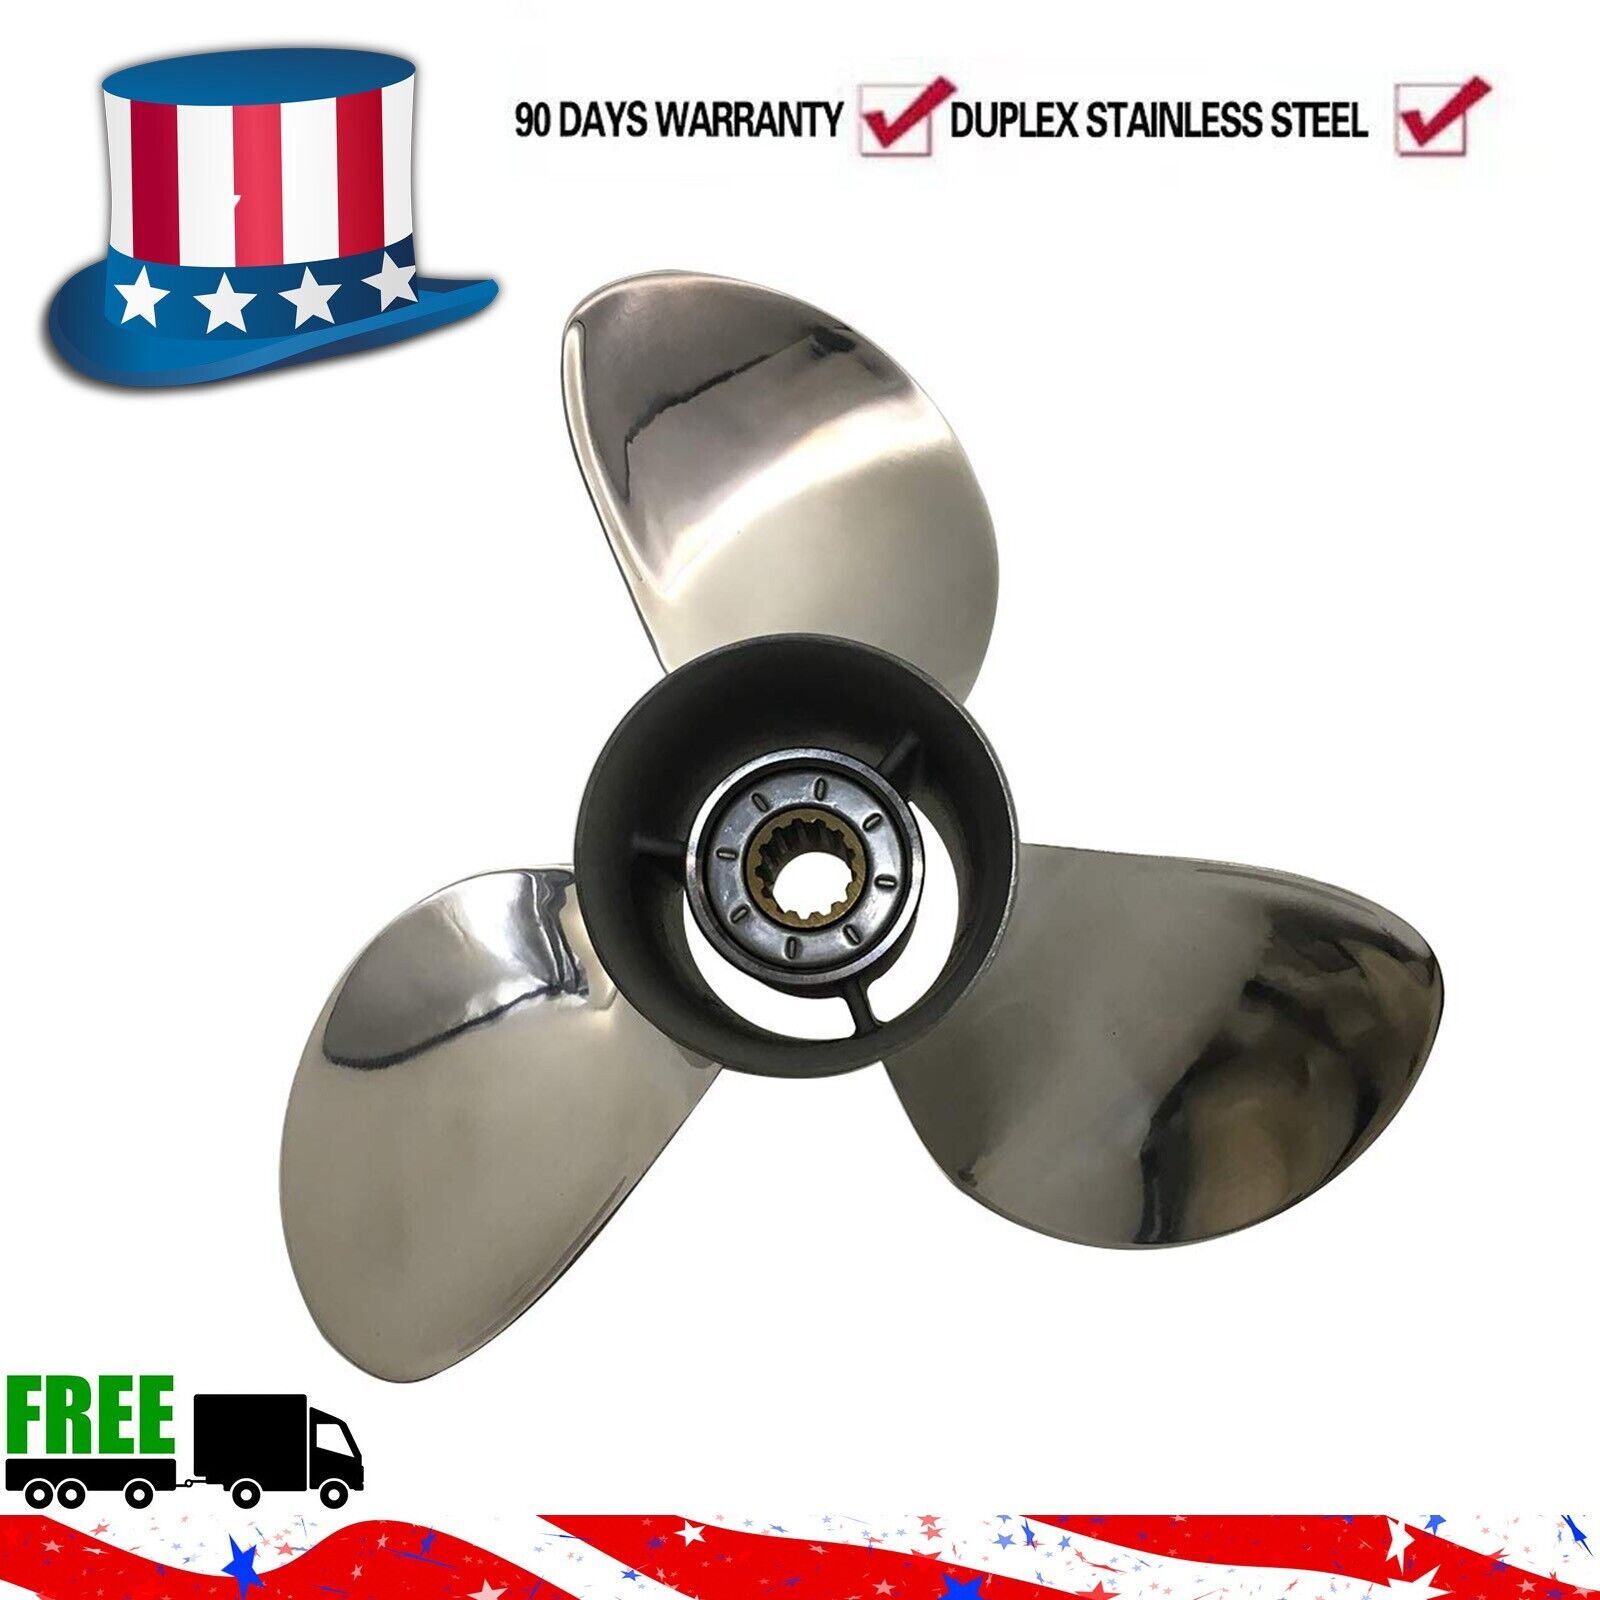 OEM 11 1/8x13 Stainless Boat Propeller Fit Tohatsu Outboard 40-50HP  13 Tooth